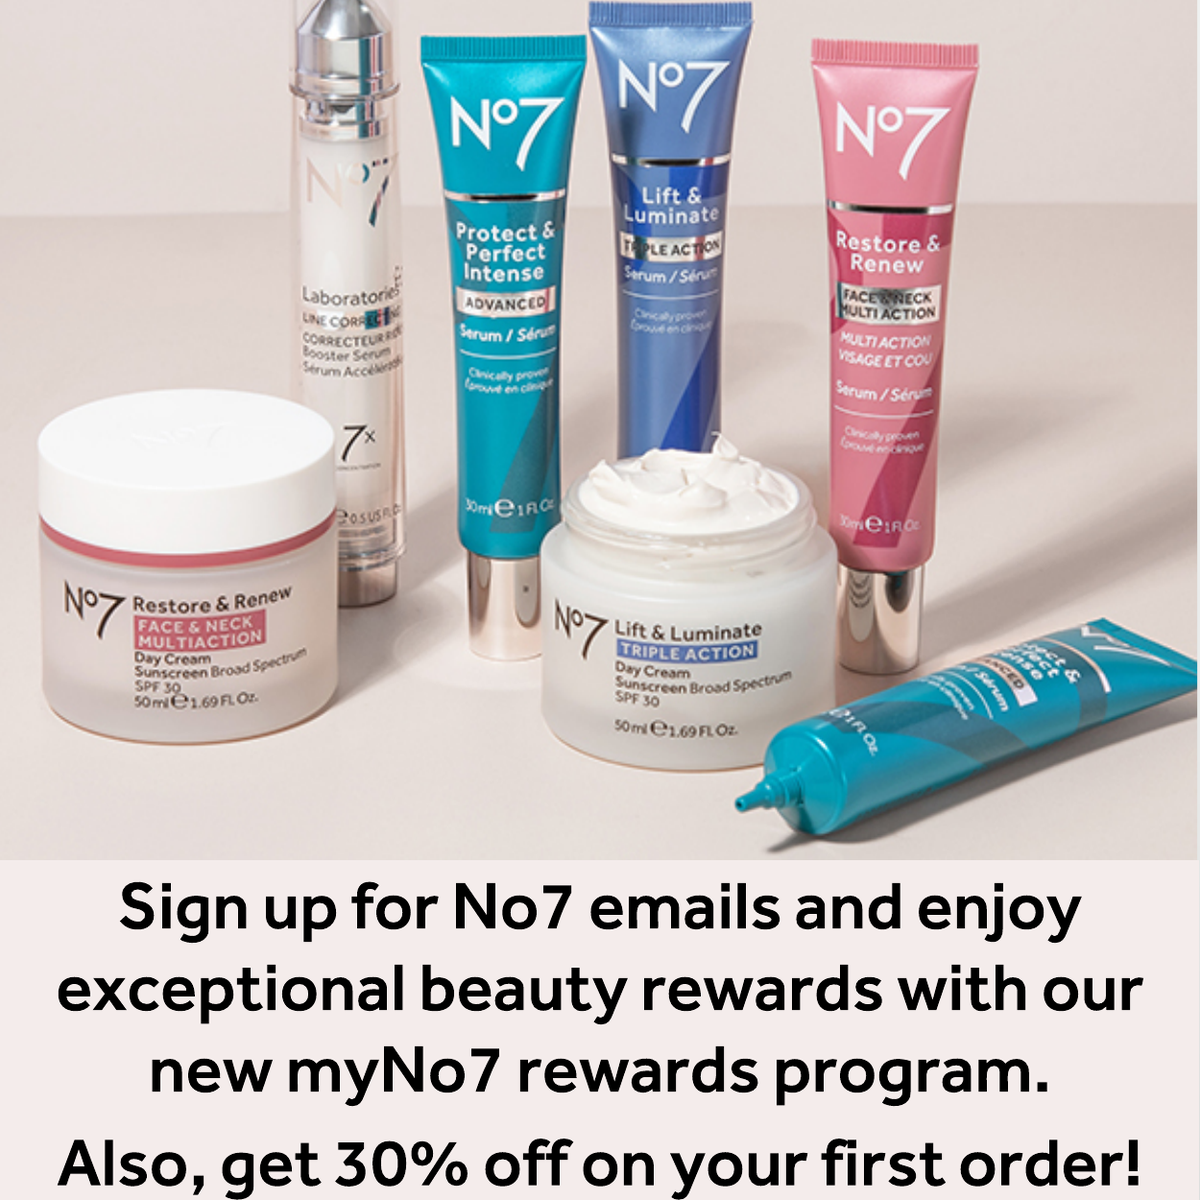 Sign up for No7 emails and enjoy: •  30% off your first order •  A special gift on your birthday •  Exclusive member-only discounts •  Early access to new products and holiday sets •  Auto-ship your favorites and save 25% •  Tips & ideas for your best skin